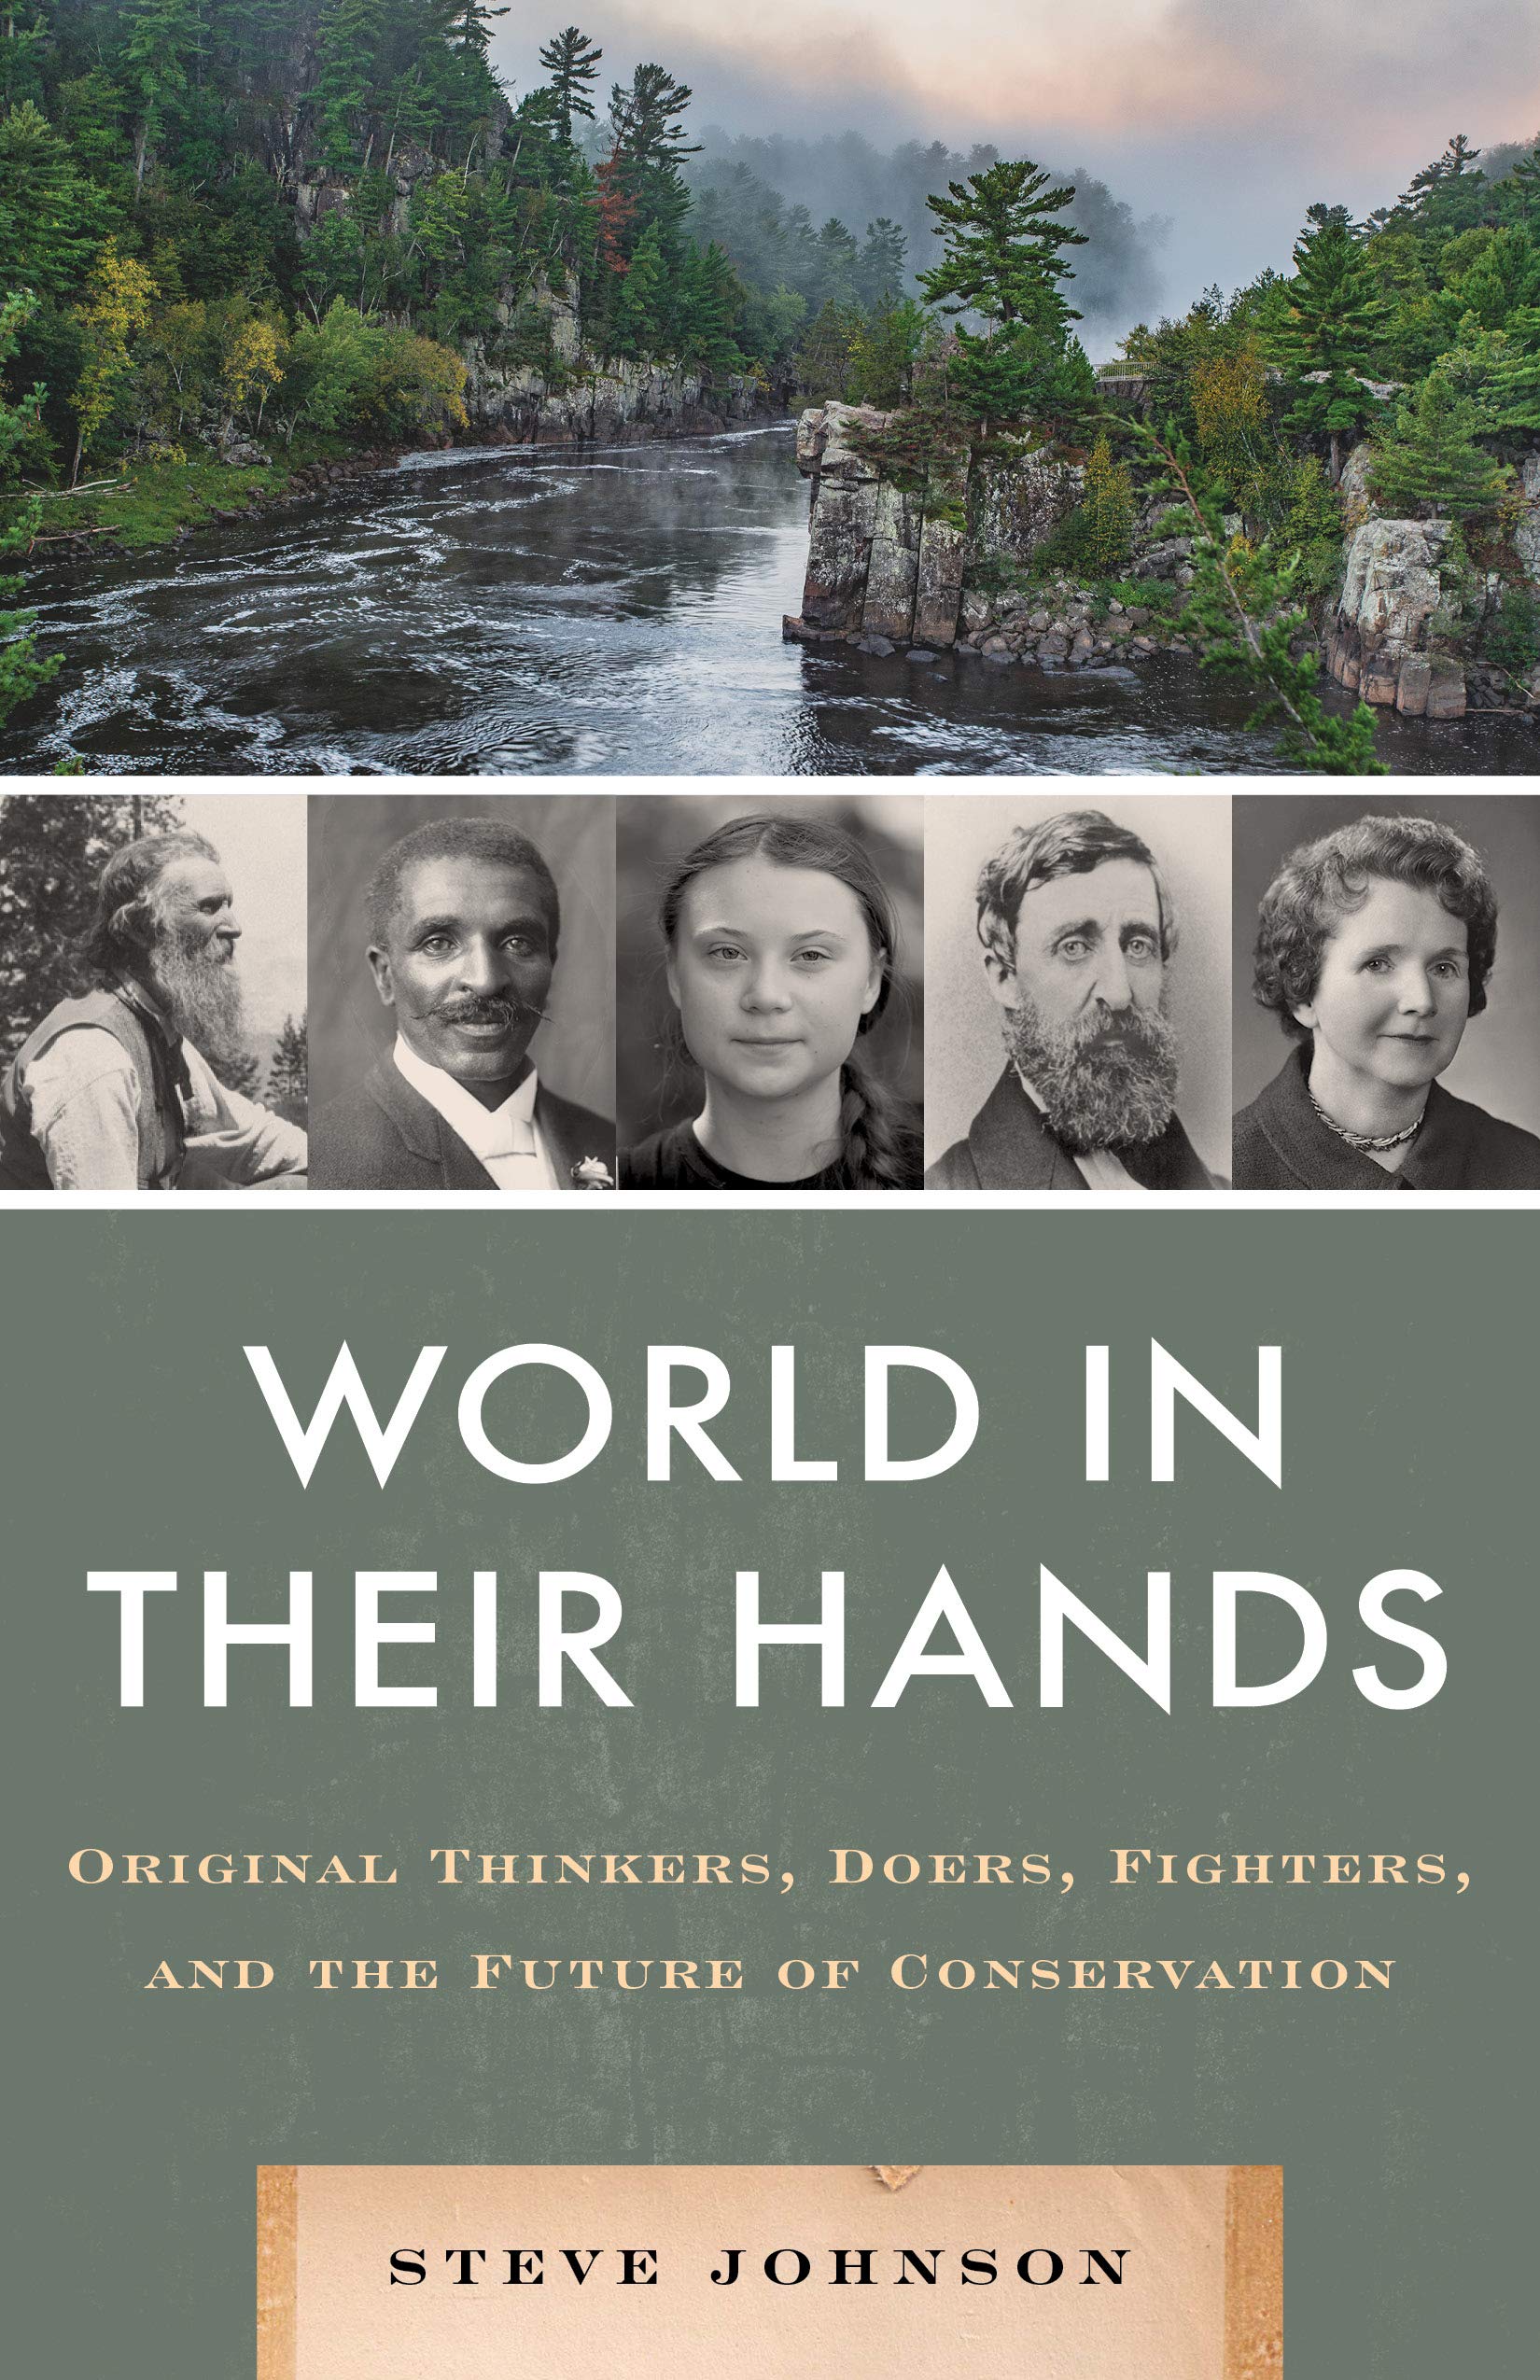 The World in their Hands